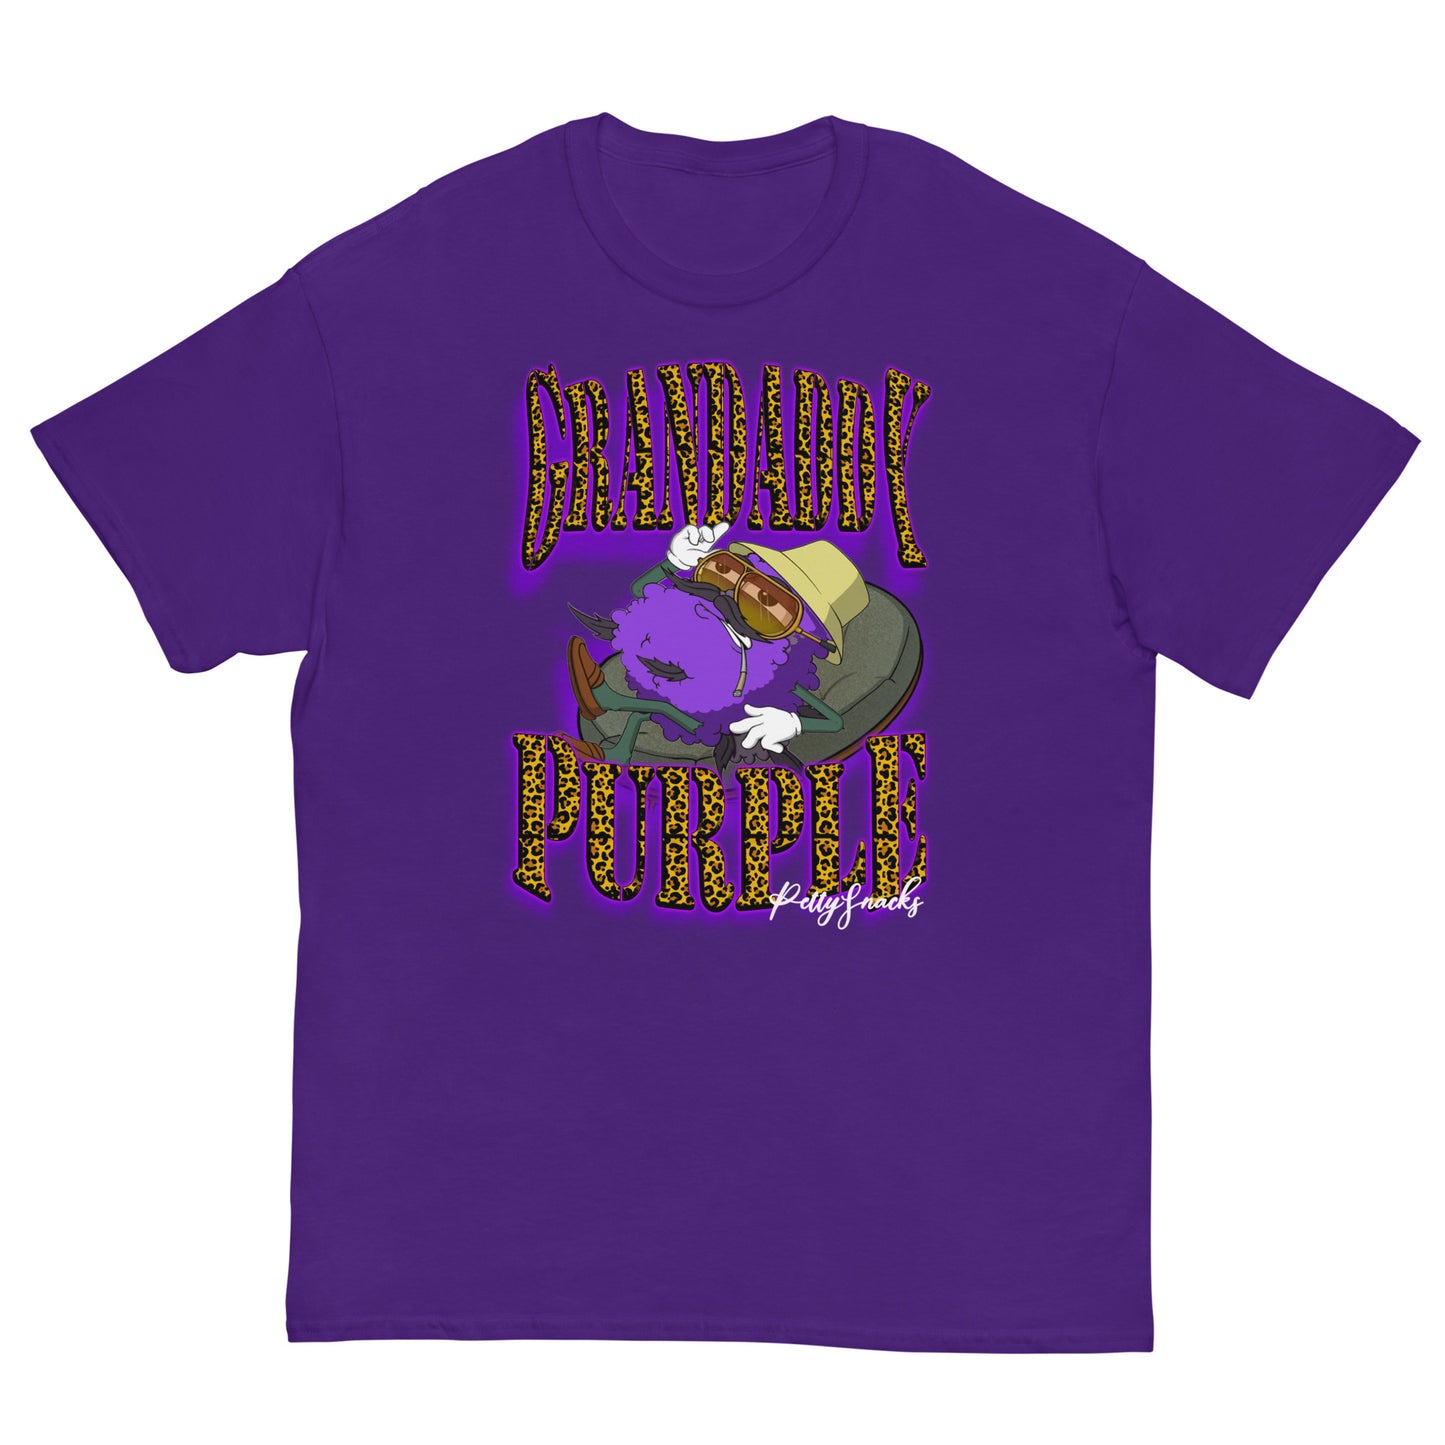 Purple T-Shirt. Front Graphic: Leopard print lettering with purple outer glow on top and bottom that reads "Grandaddy Purple". In the middle of the words is a large Purple weed nugget character with a cigarette extended out of mouth, yellows shades, and a safari hat. The nug is sitting on a papasan chair. "Petty Snacks" is in small white cursive on bottom right corner of graphic